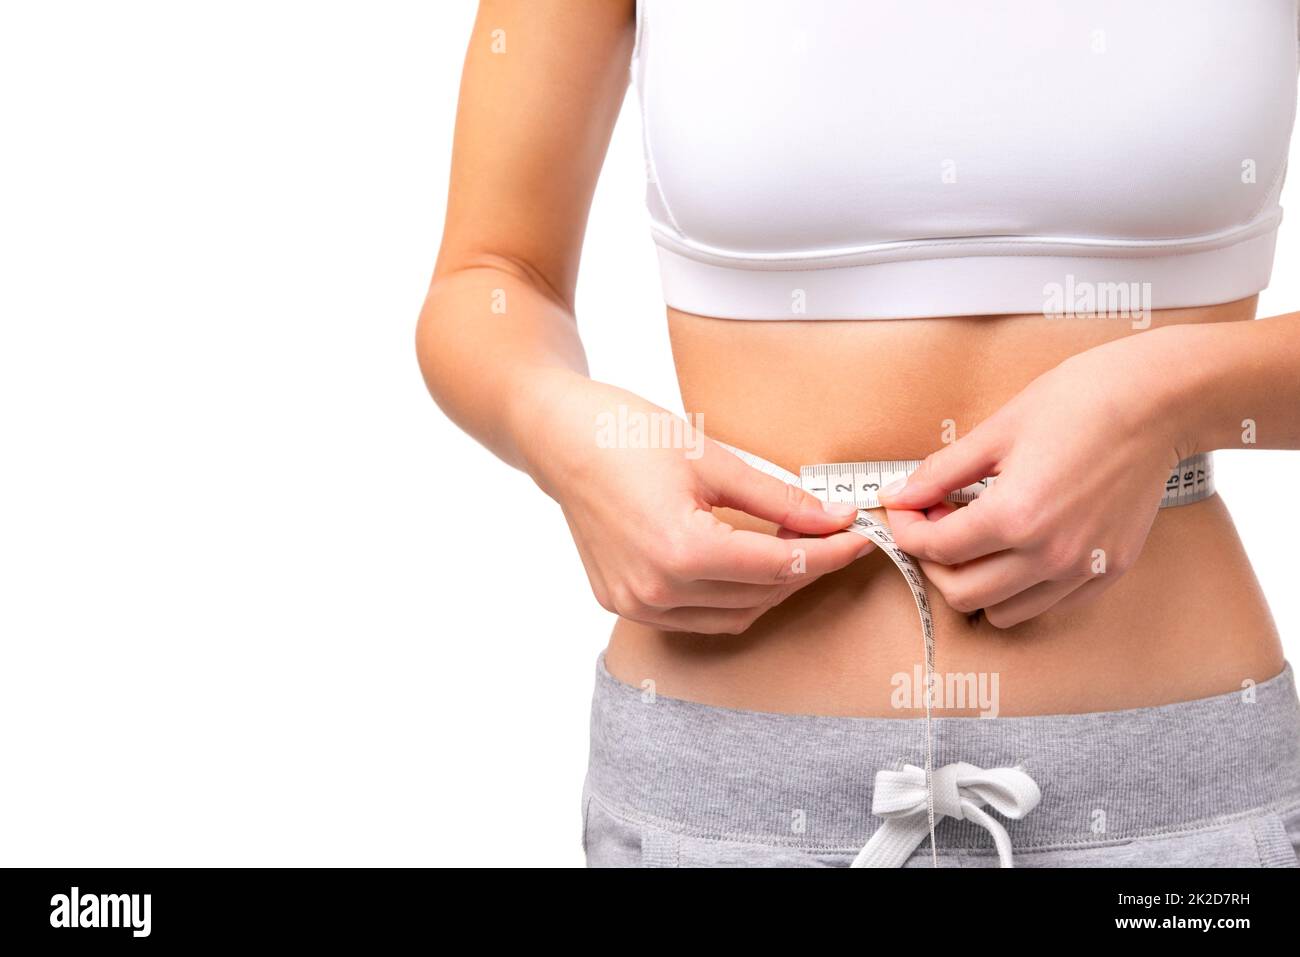 Measuring progress. Closeup of a fit womans waist while she is measuring it with tape. Stock Photo